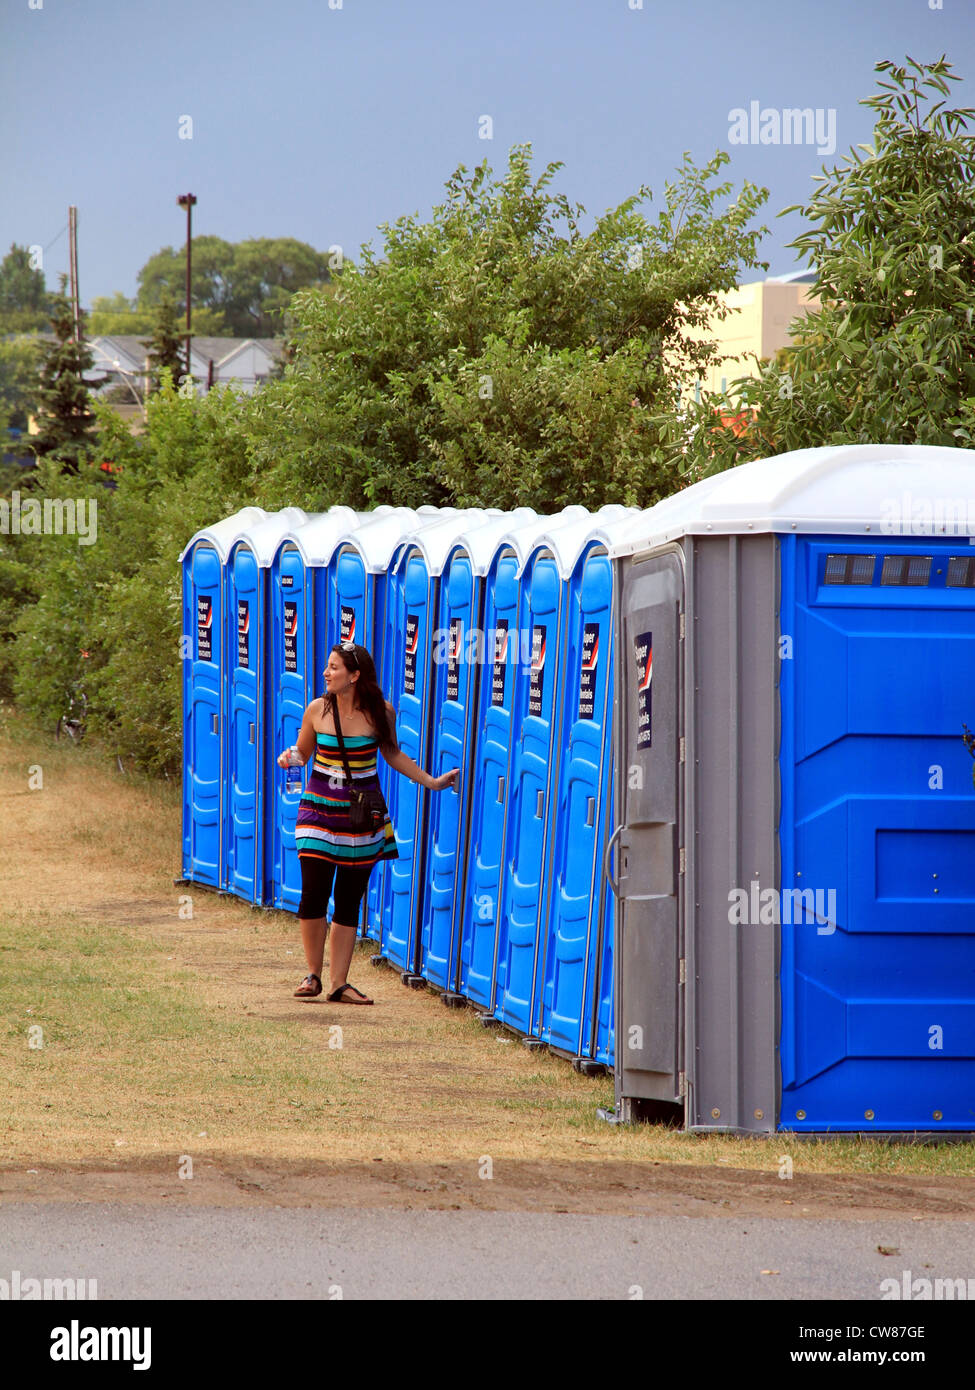 A line of portable toilets at an outdoor event Stock Photo